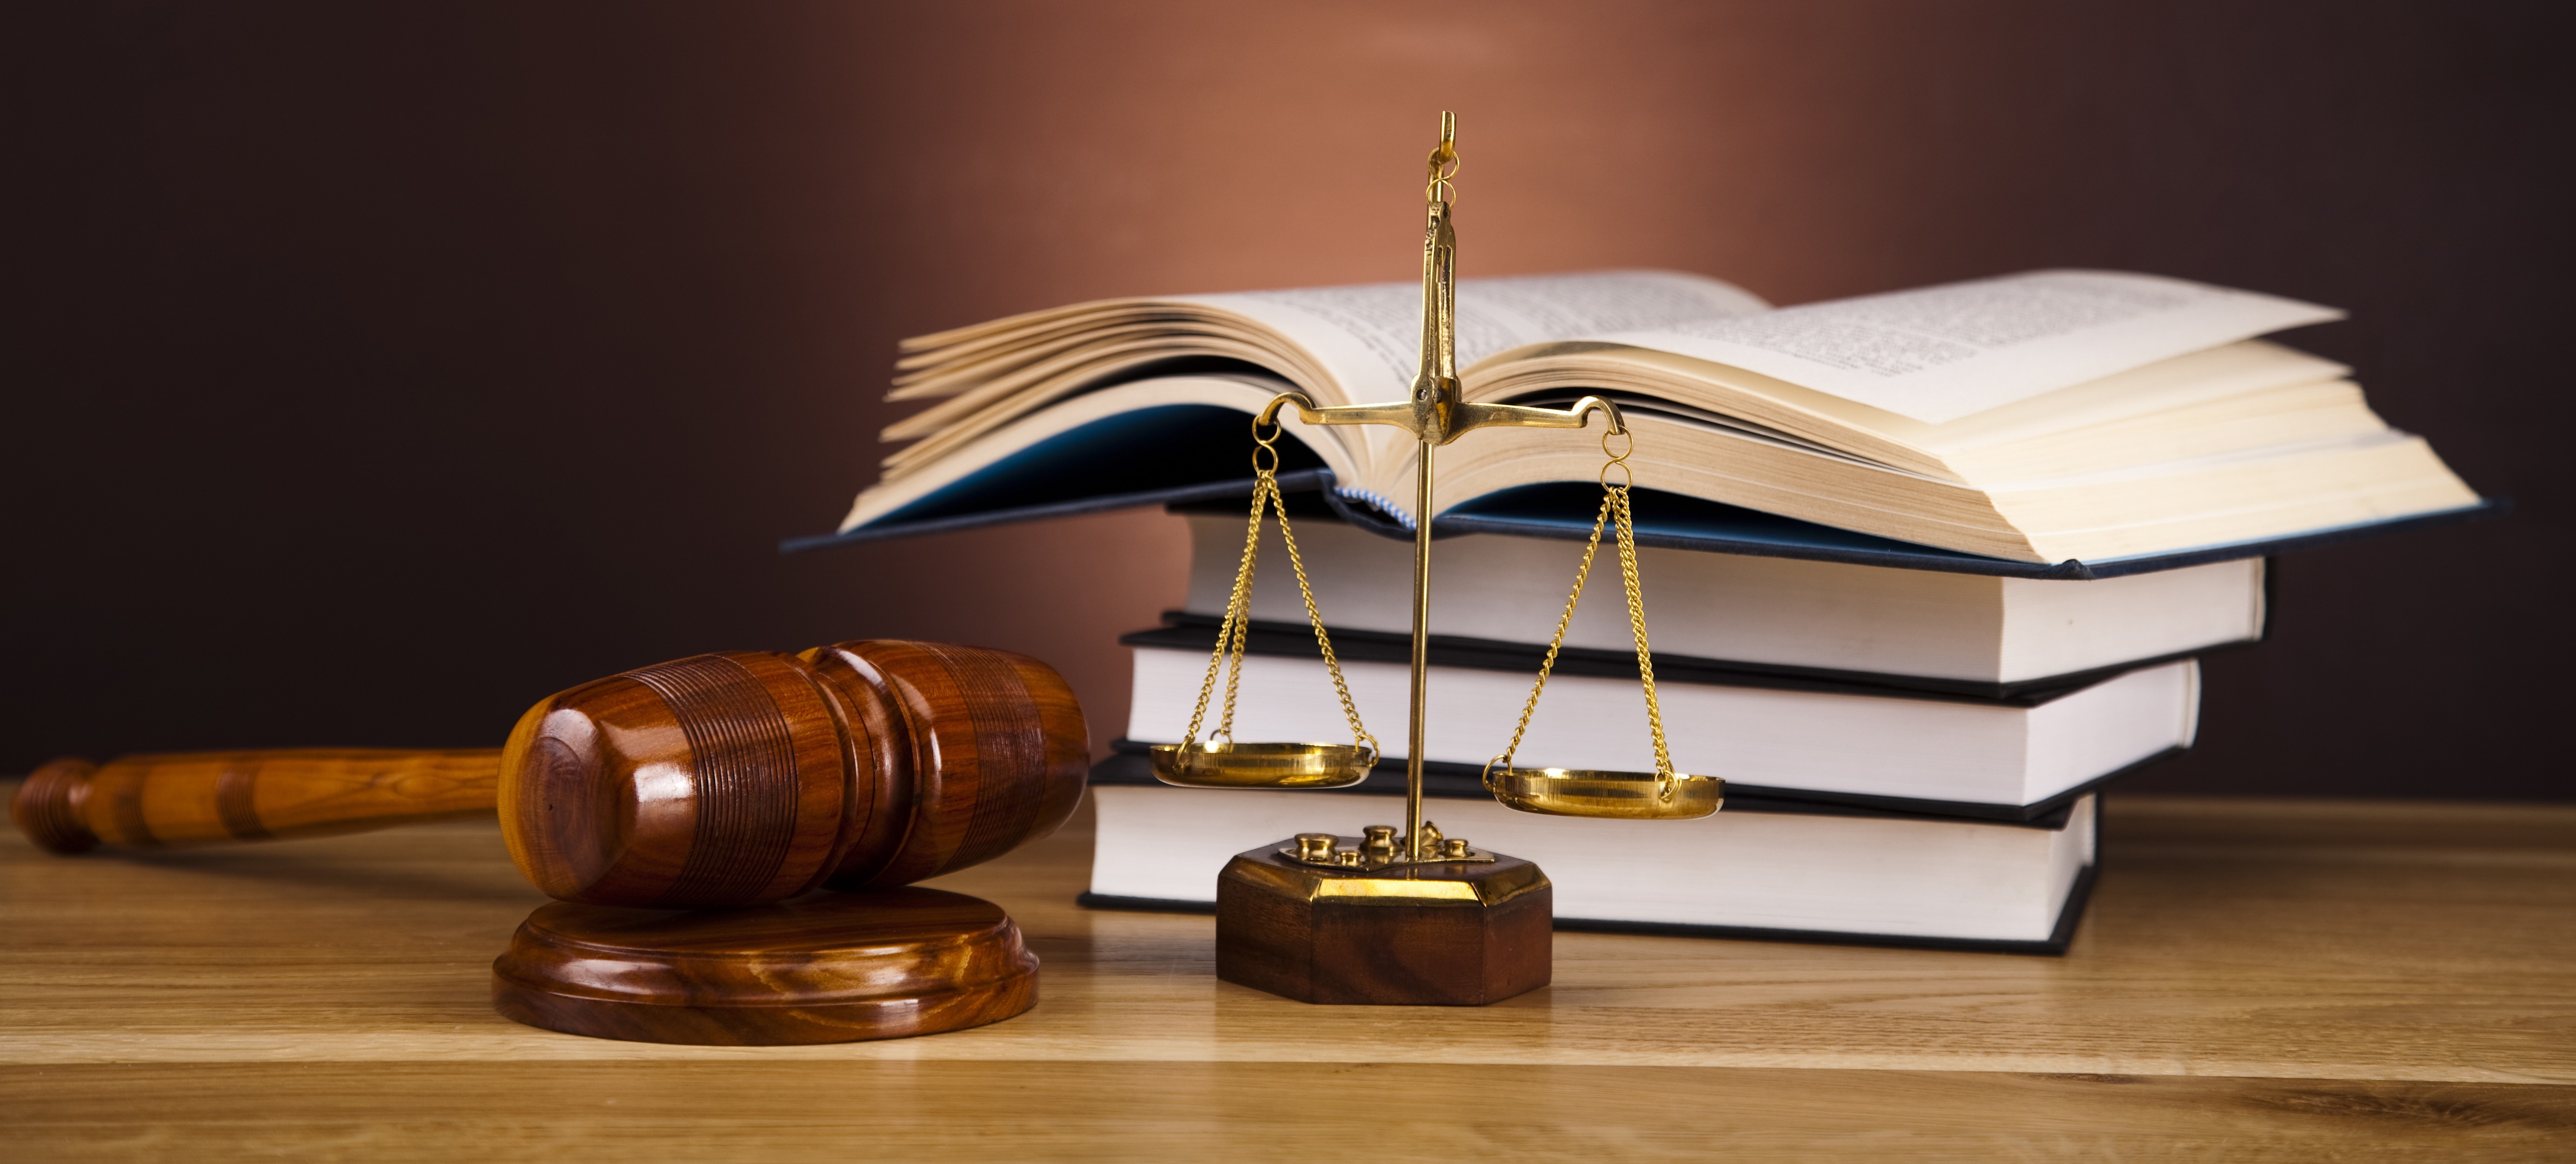 Books, a gavel, and scales of justice pictured on a desk.